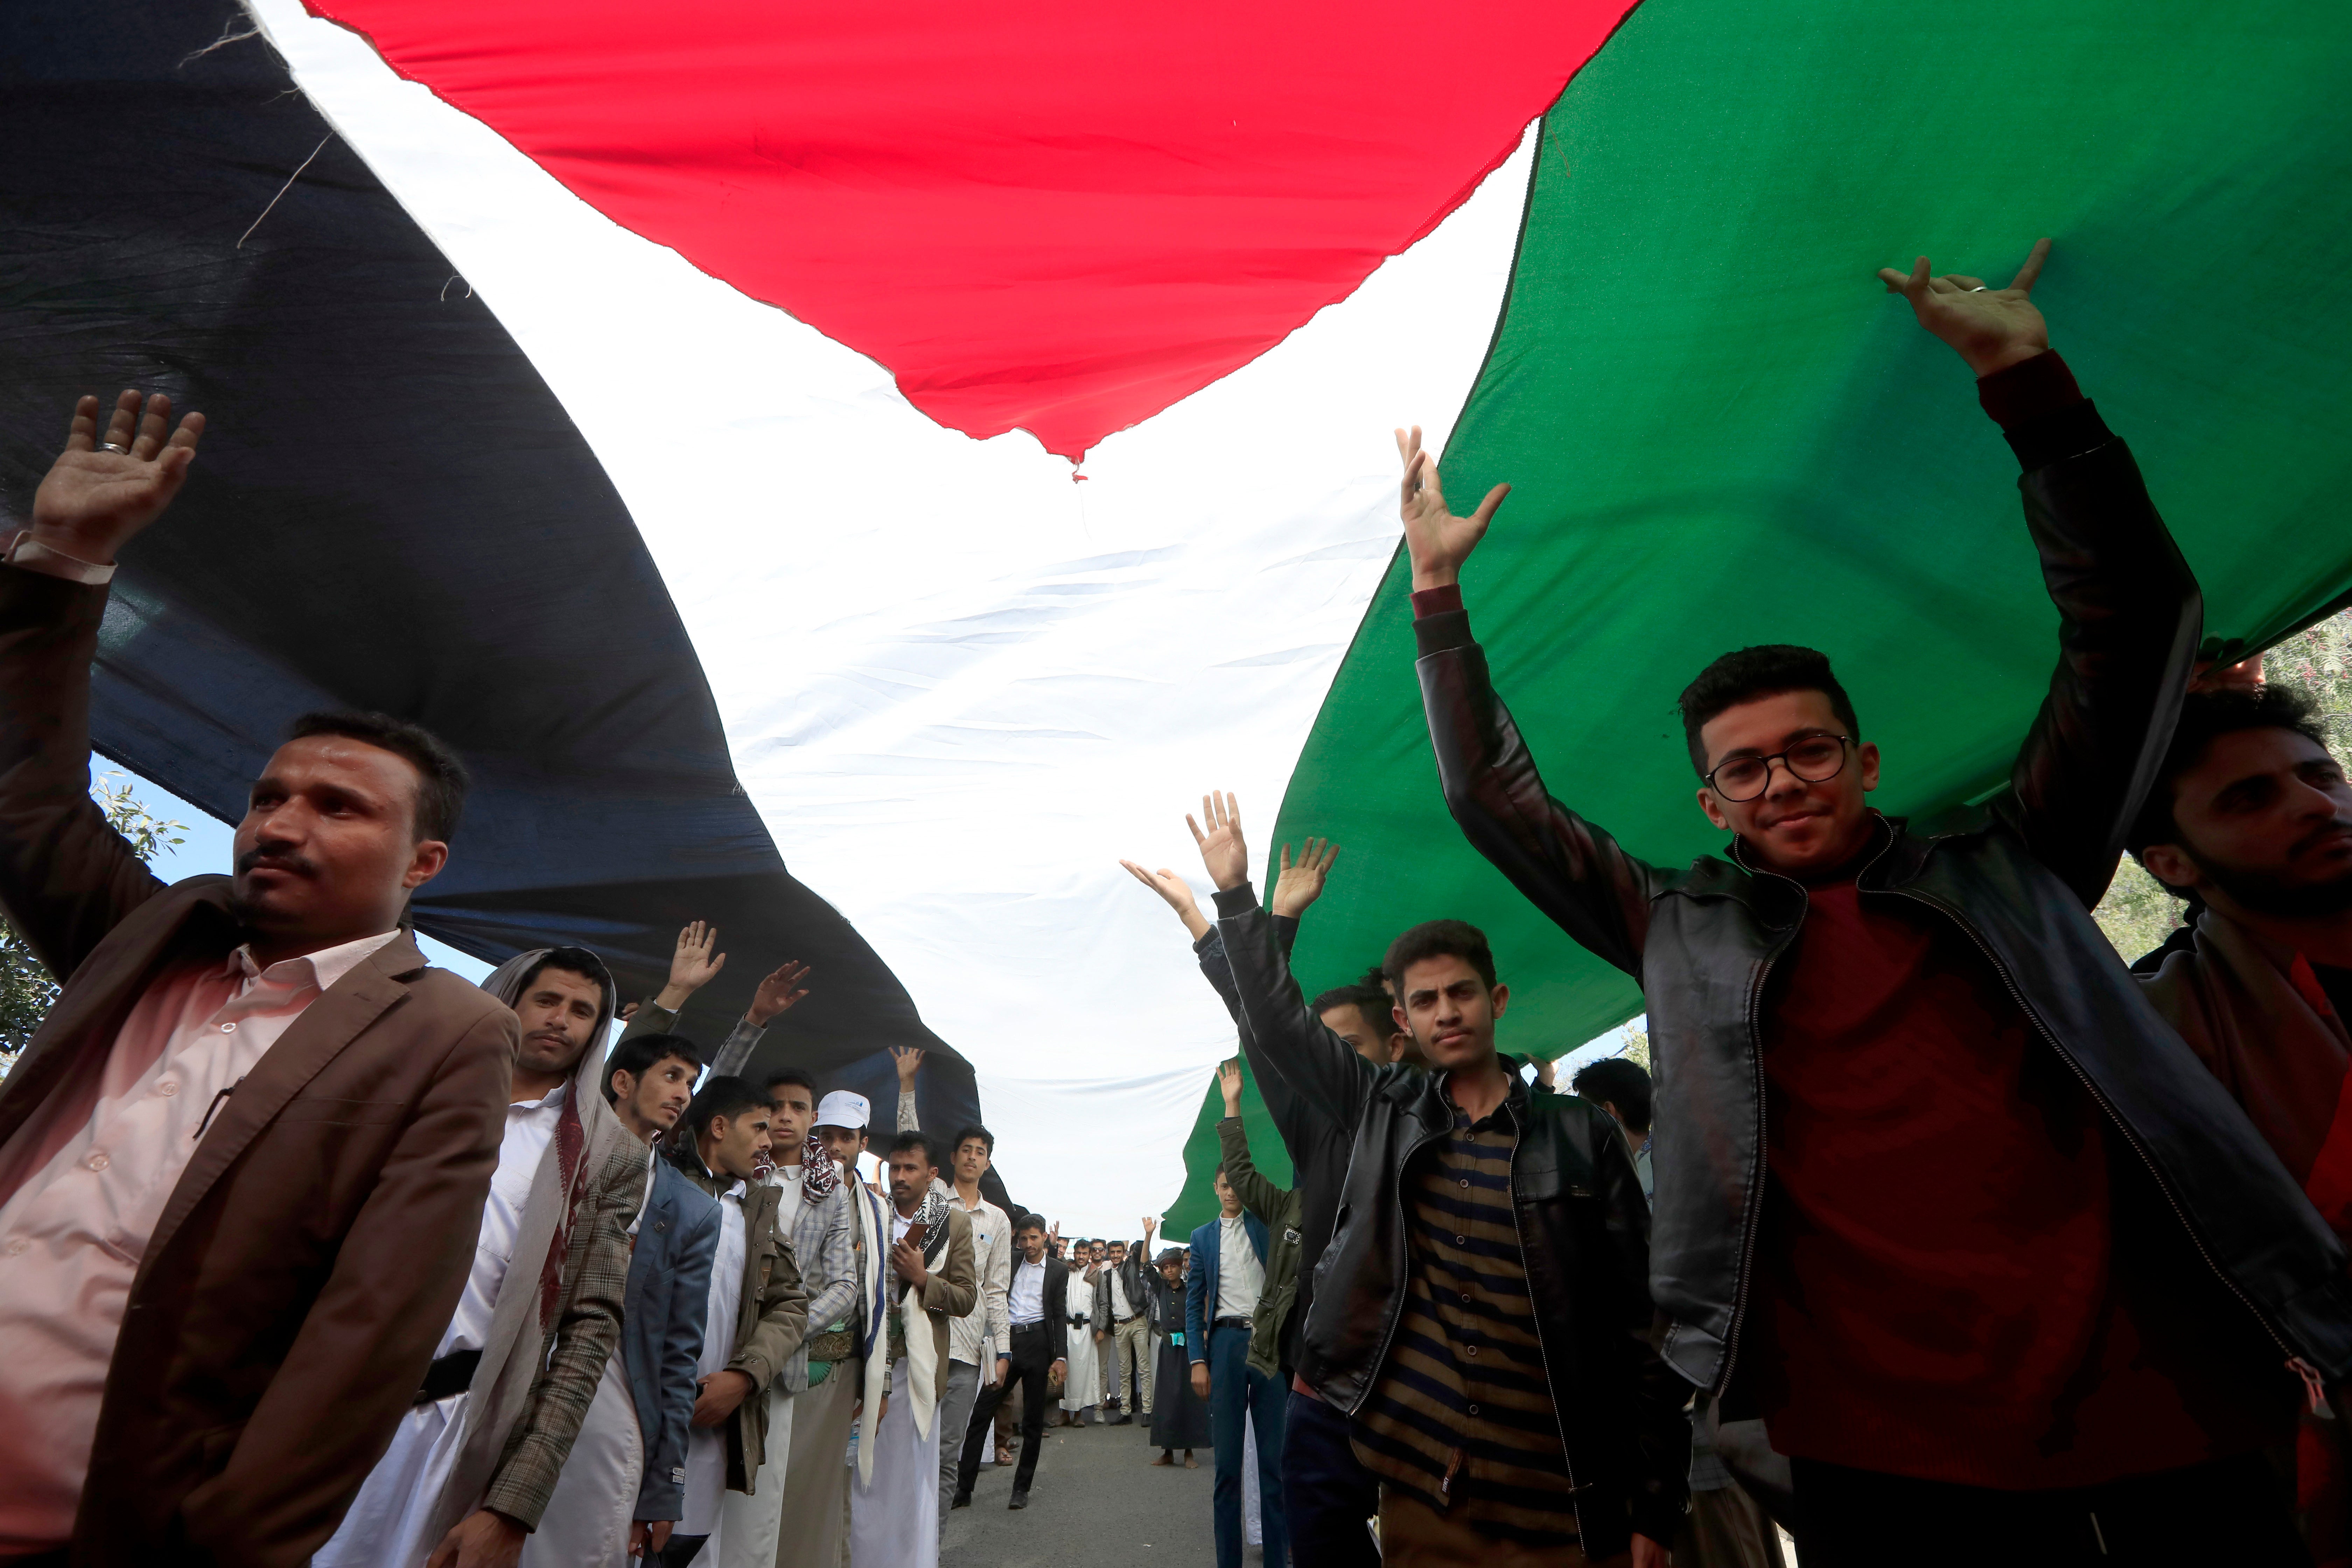 Students stand under a Palestinian flag during a rally in solidarity with the Palestinian people, at Sana’a University, in Sana’a, Yemen, on 14 February